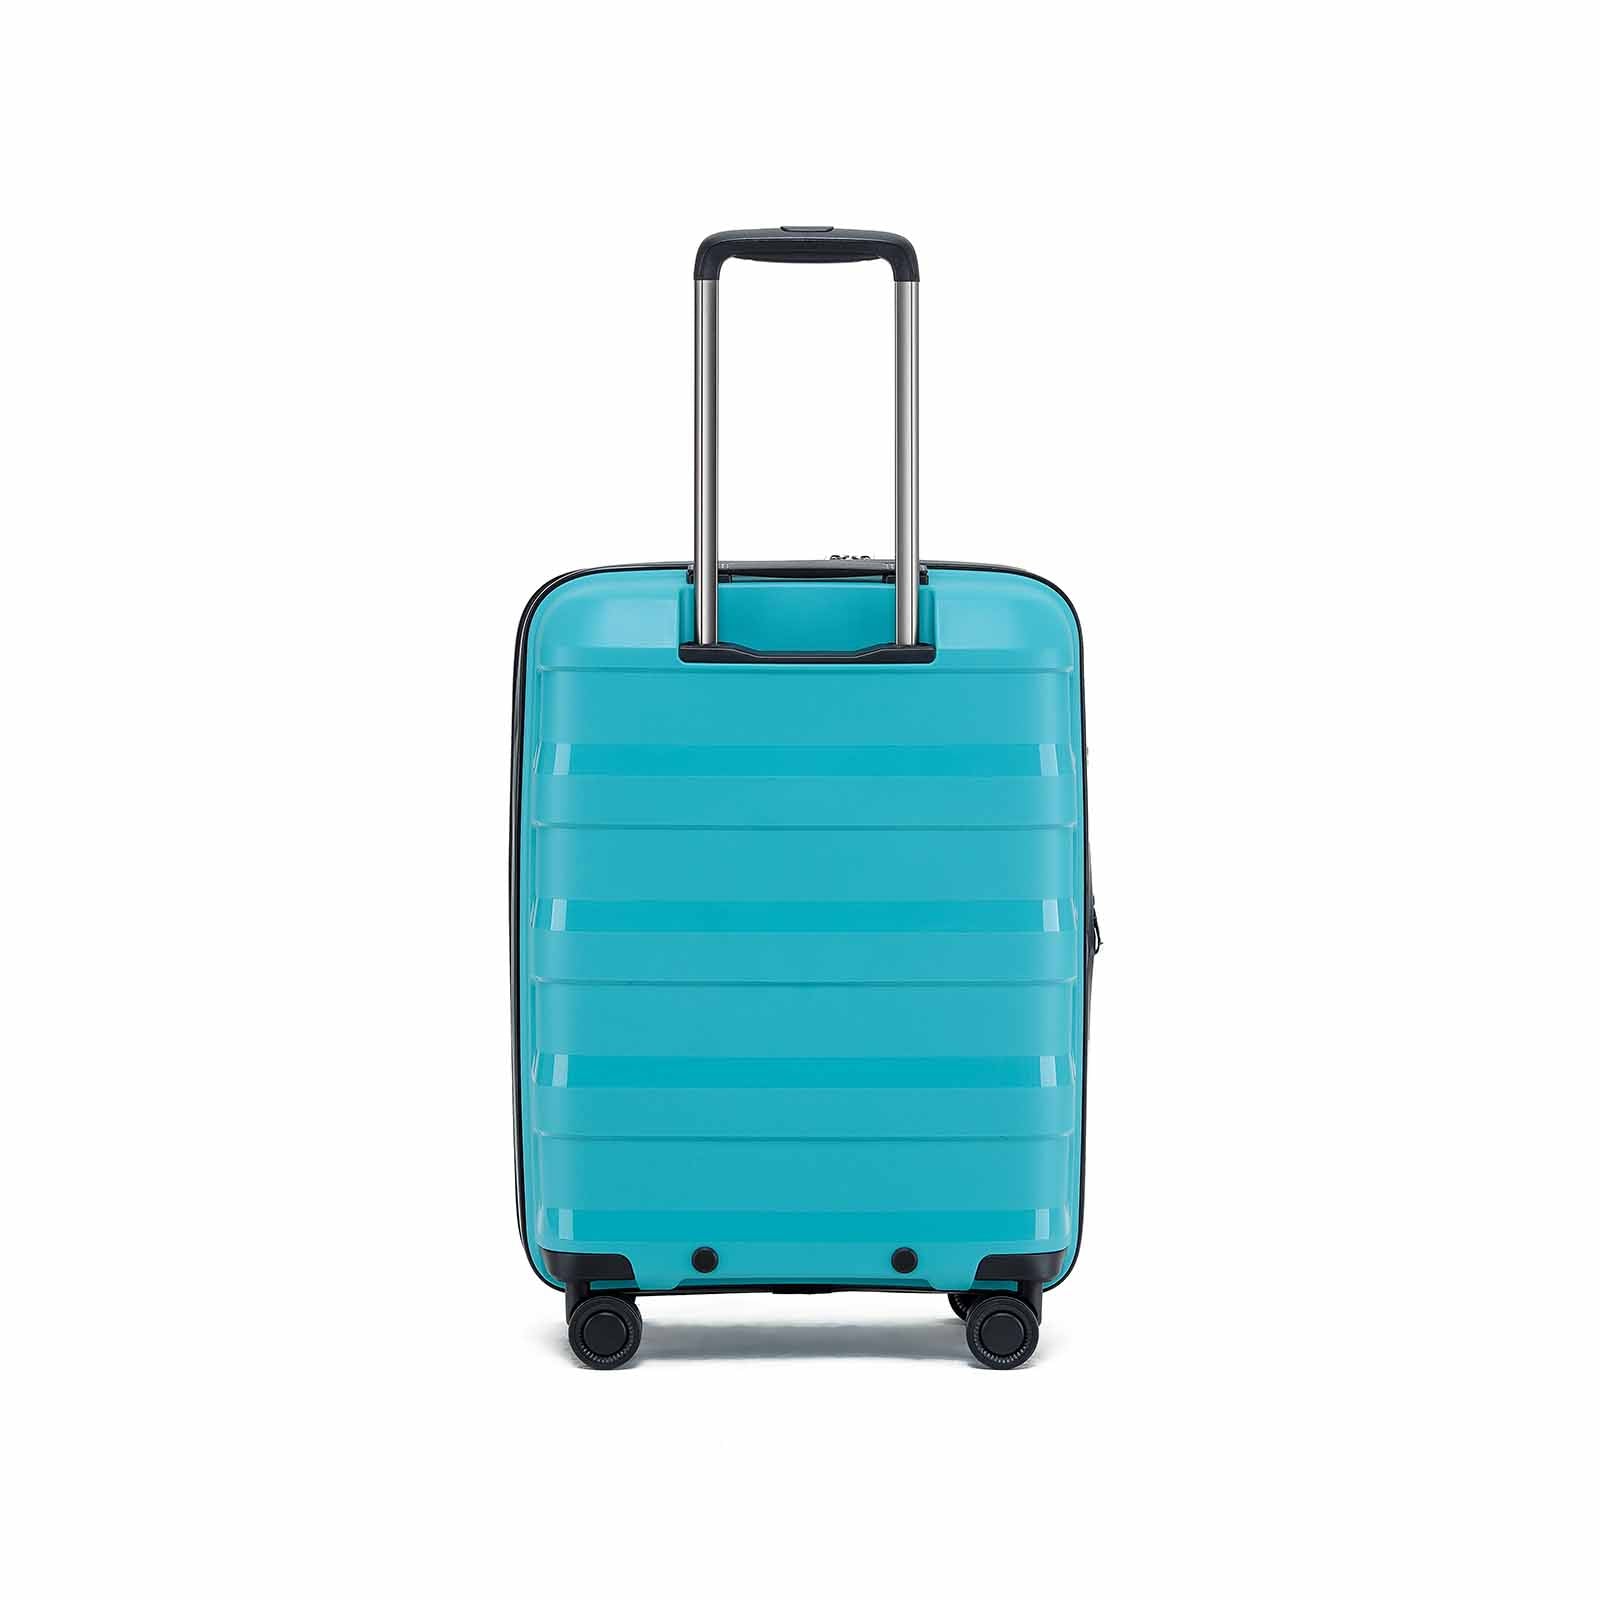 Tosca Comet 4 Wheel 55cm Carry-On Suitcase Teal